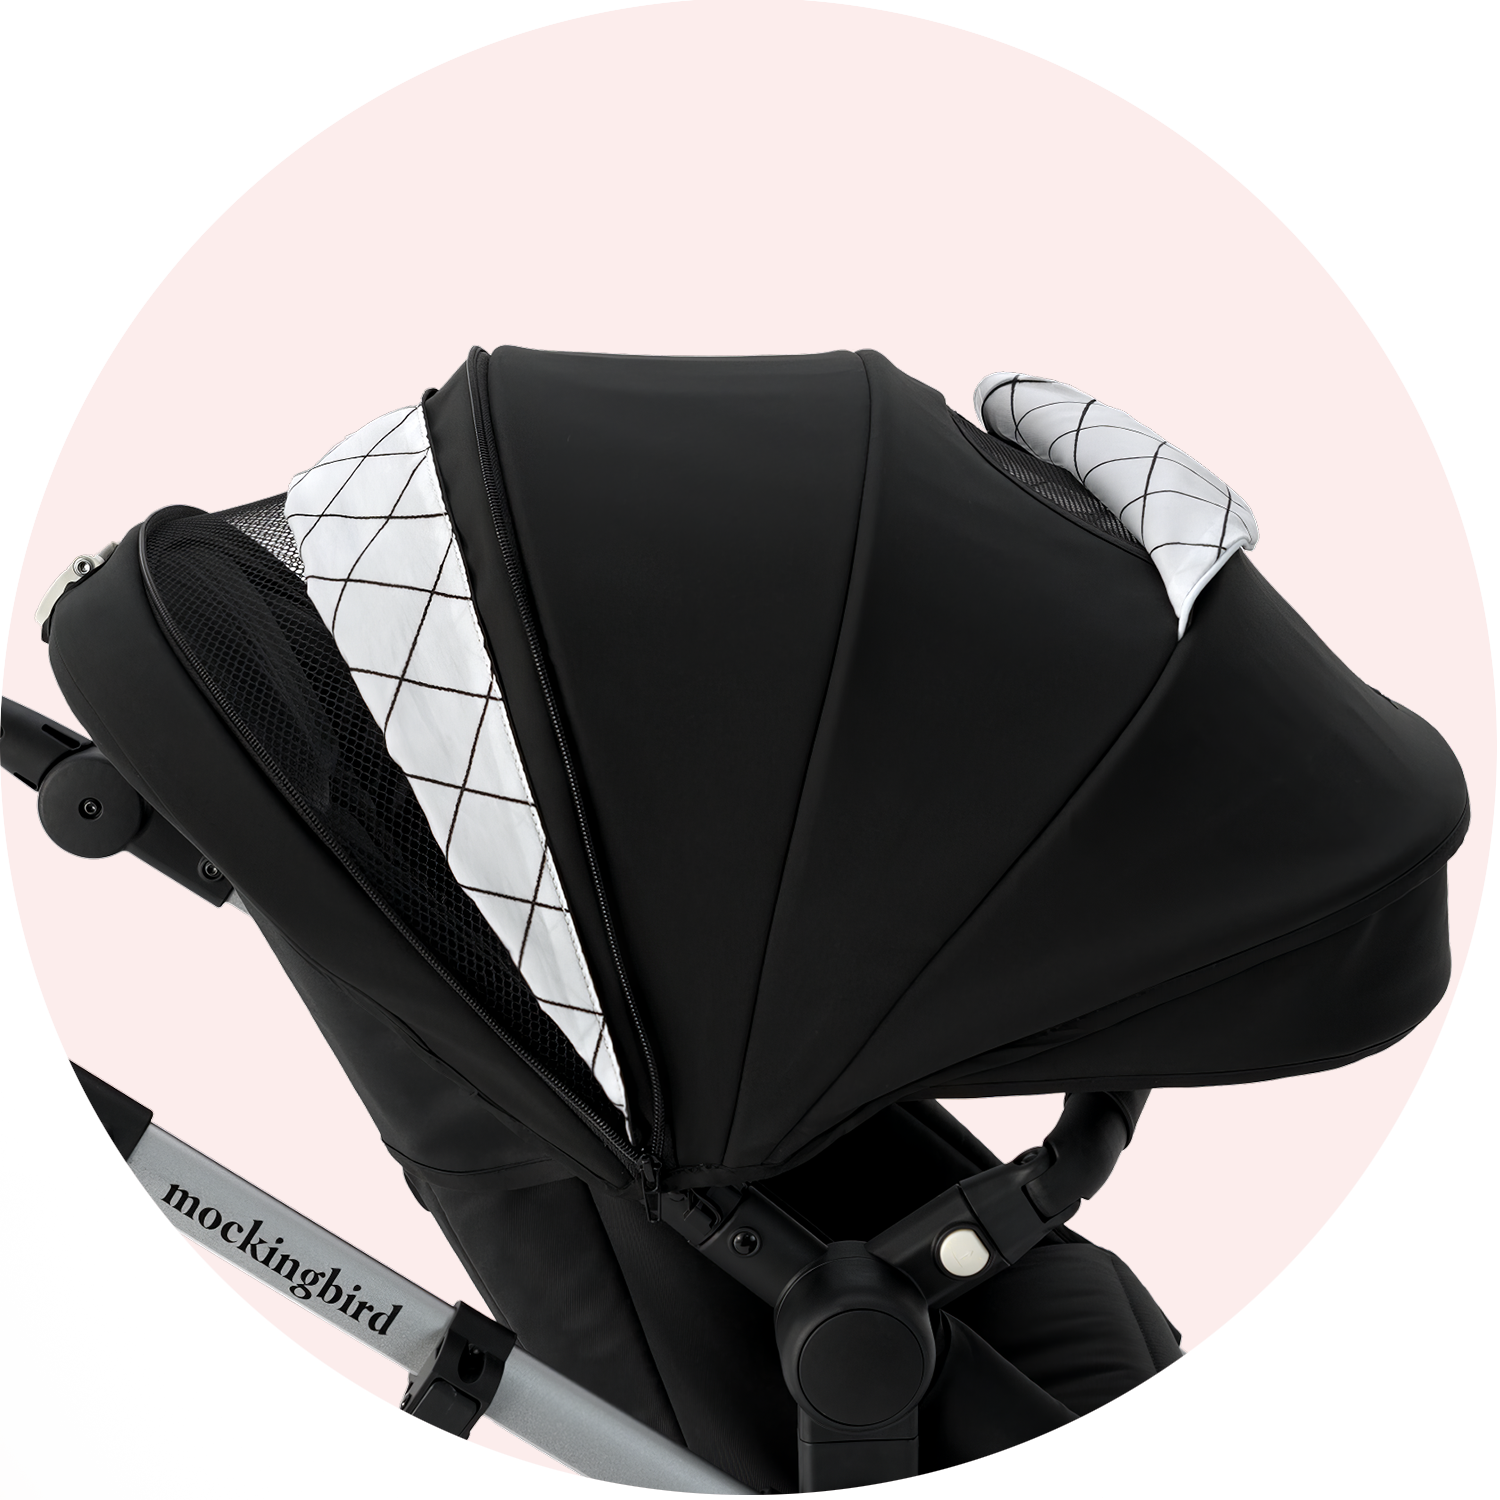 Close-up of a modern black mockingbird stroller with a geometric-patterned interior, displayed against a light pink background.